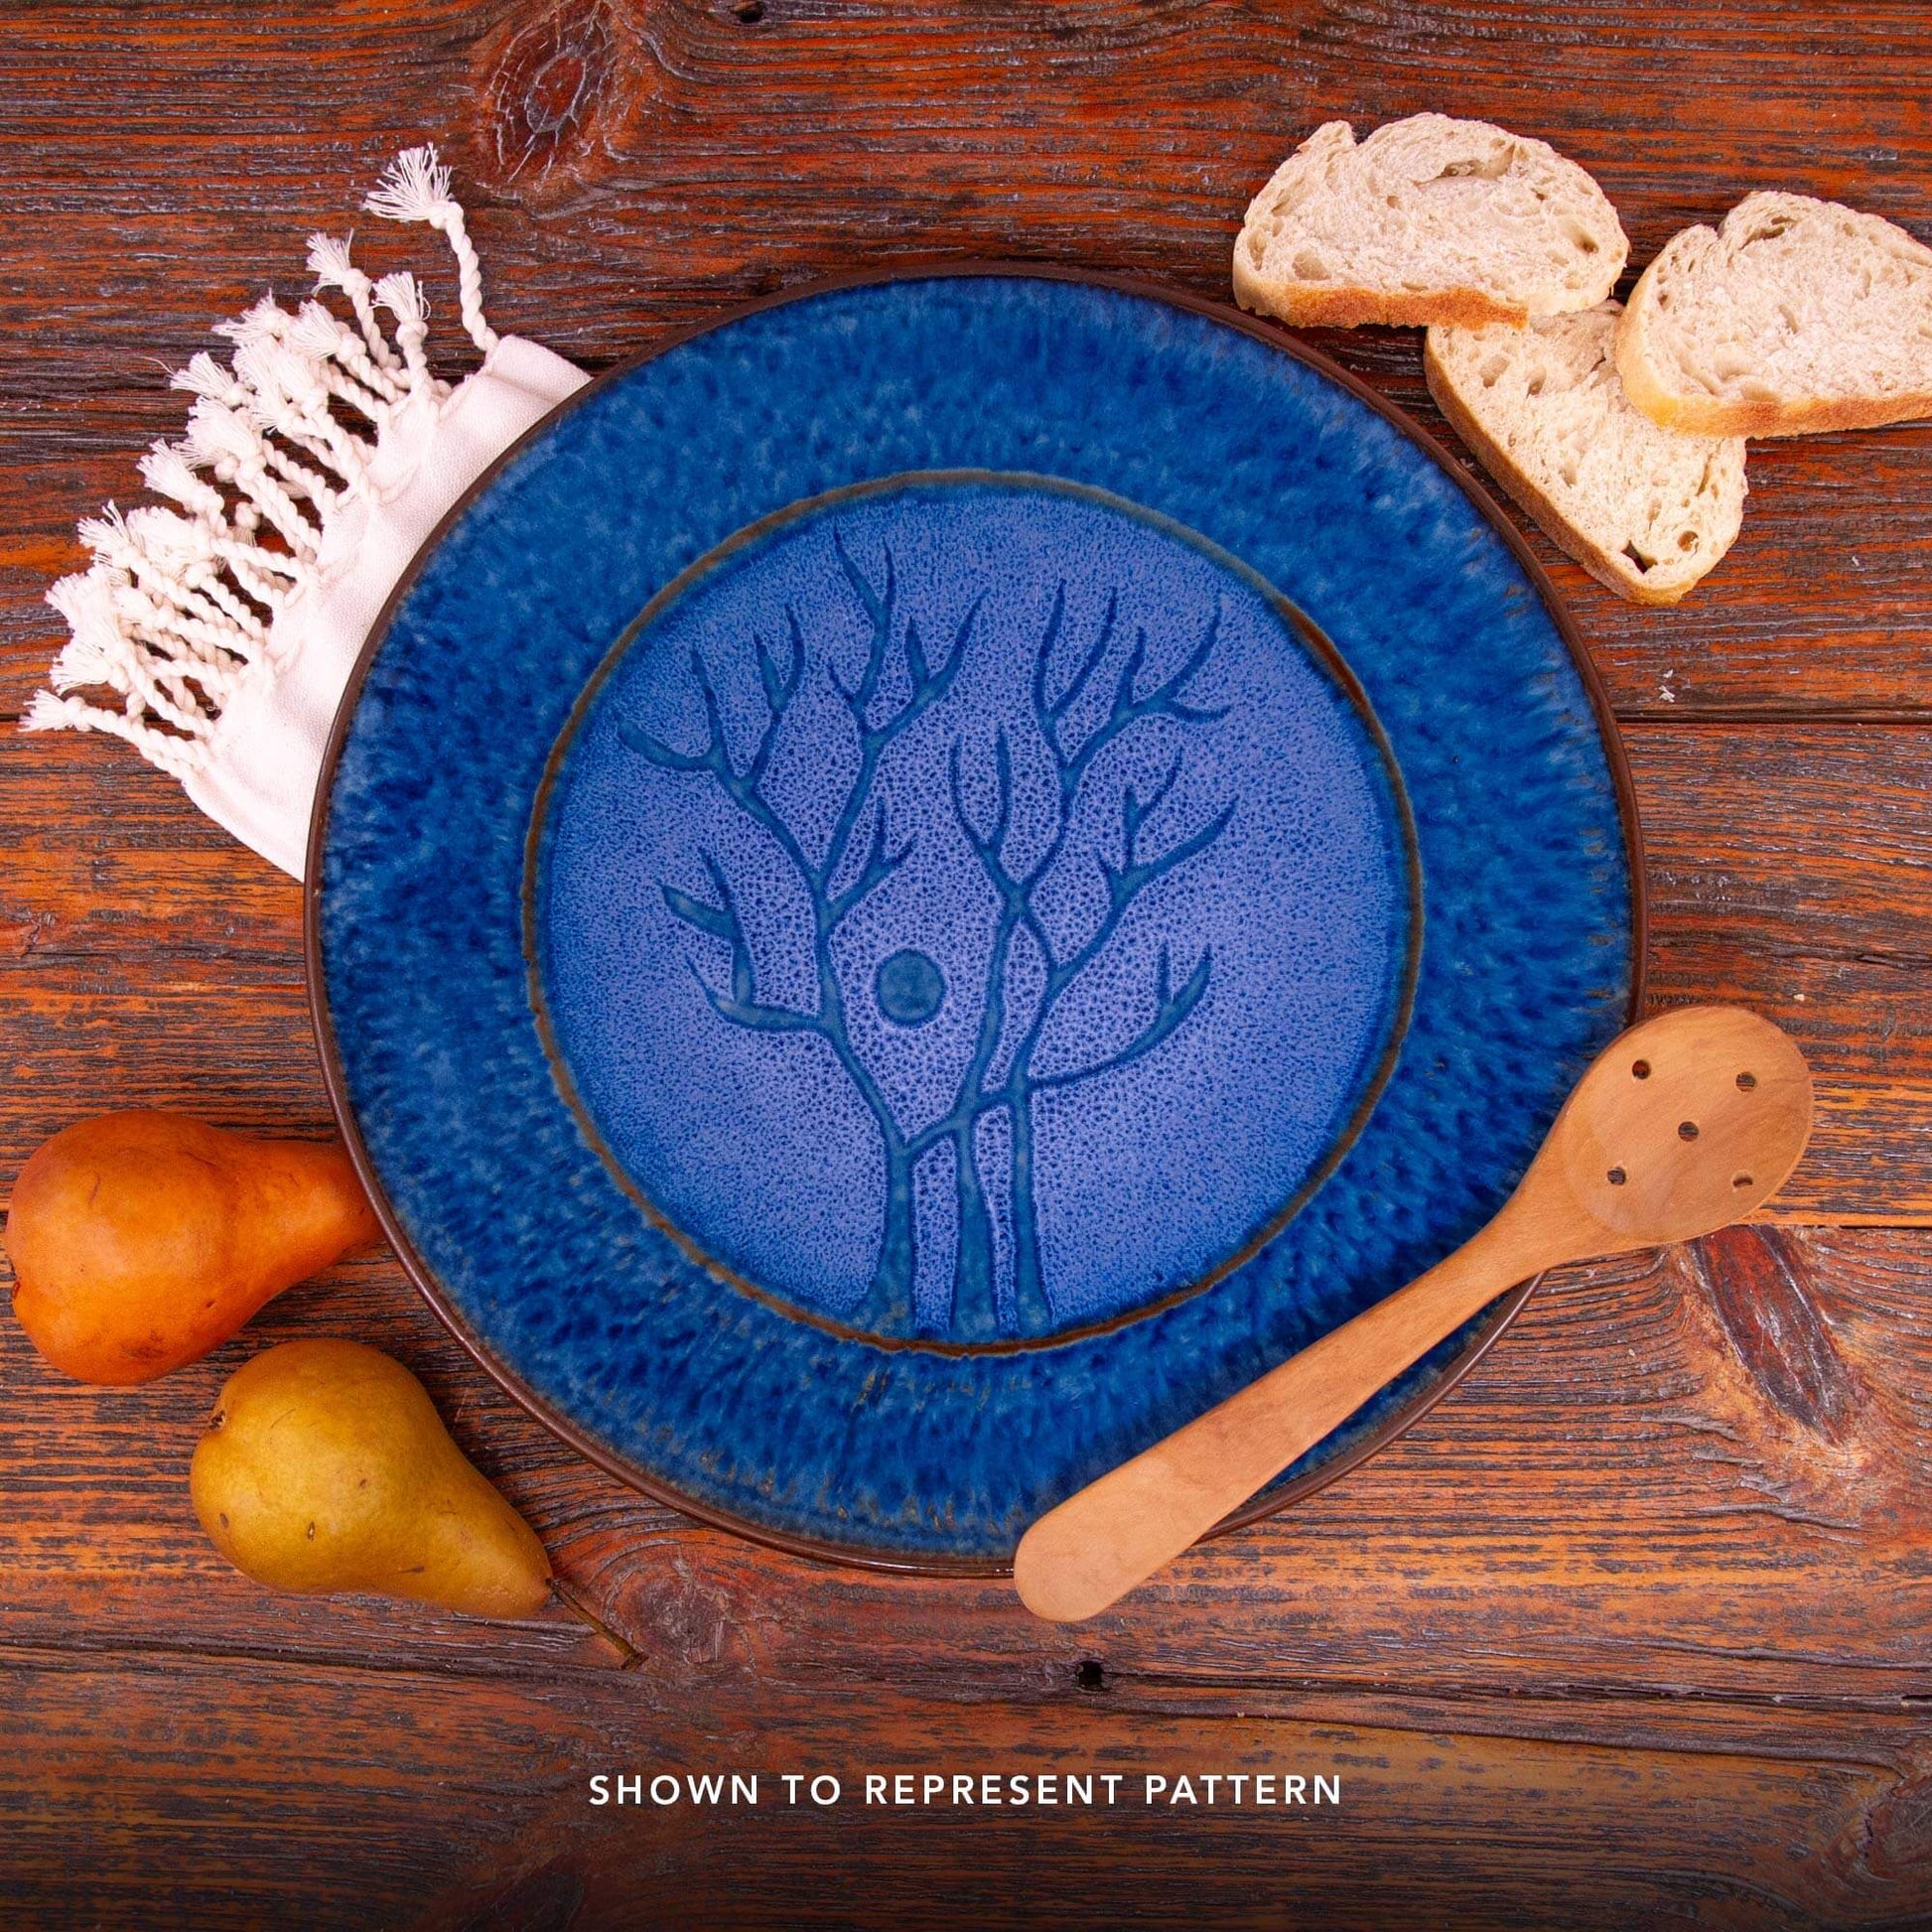 Handmade Pottery Harvest Bowl in Blue Tree pattern made by Georgetown Pottery in Maine